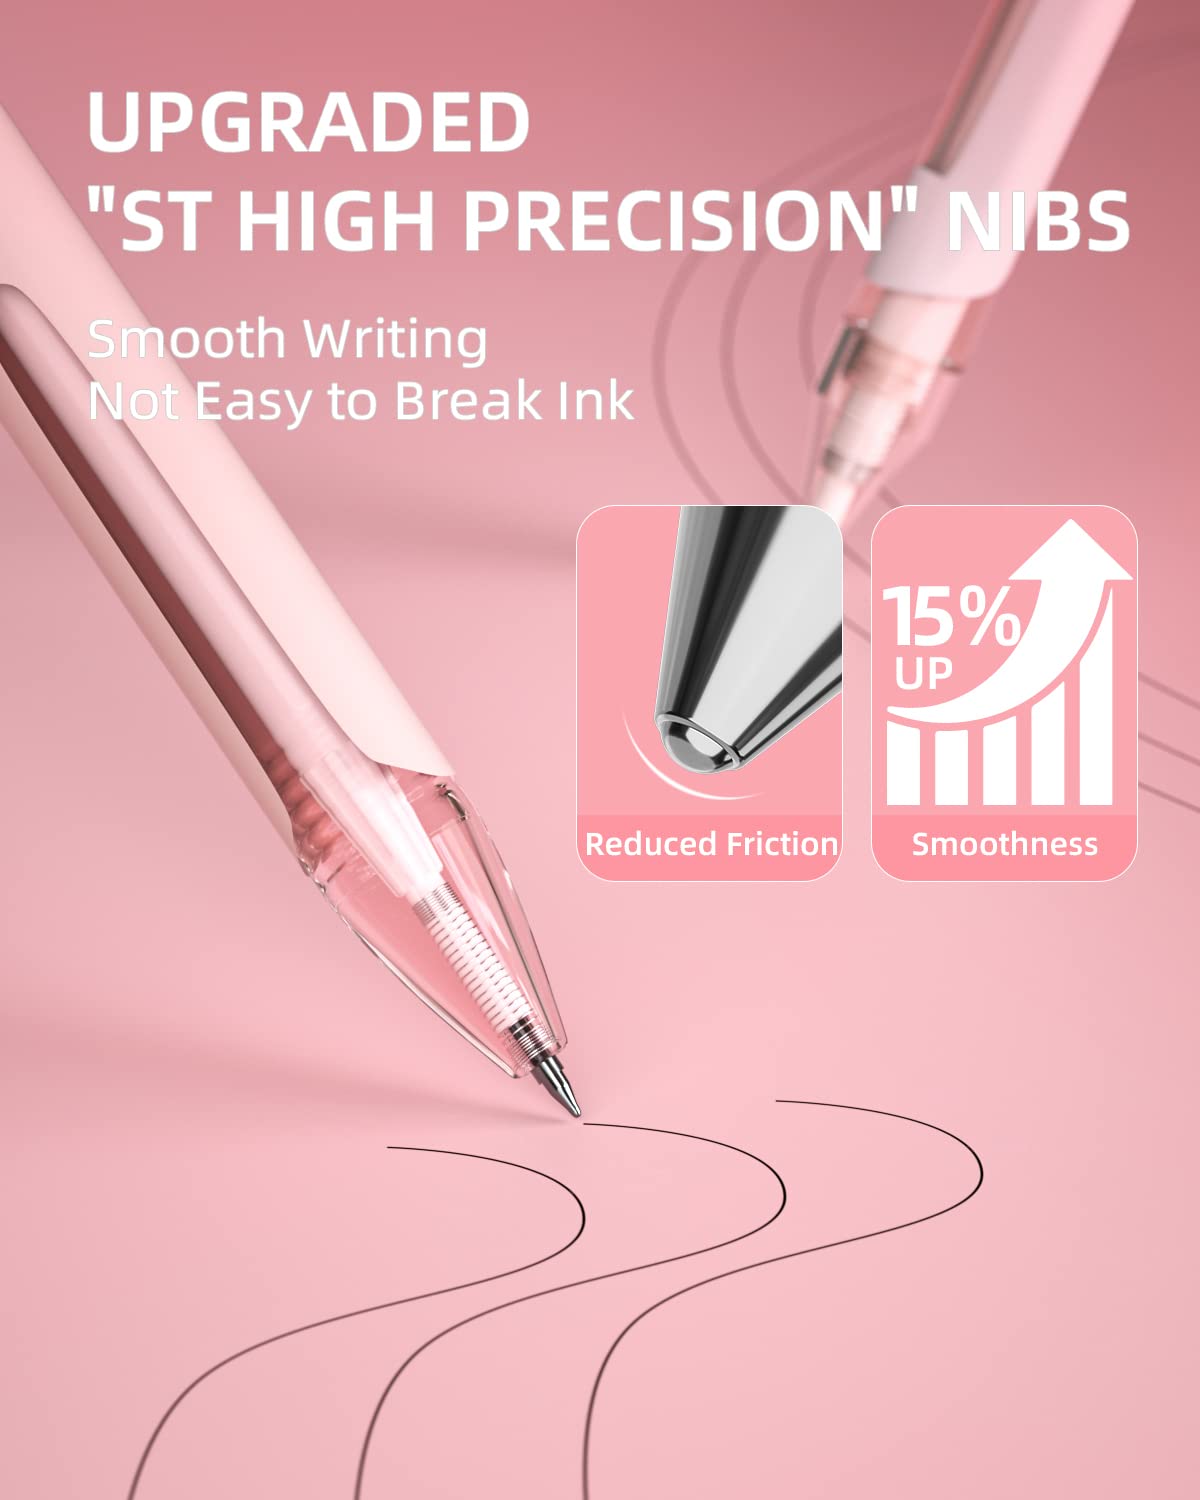 Nicpro 13PCS Pastel Gel Ink Pen Set with Case, Cute Retractable 0.5mm Fine Point 12PCS Black Ink Pens with 1 Highlighter, Aesthetic Pens for School, Student Note Taking,Writing, Office Supplies (Pink)